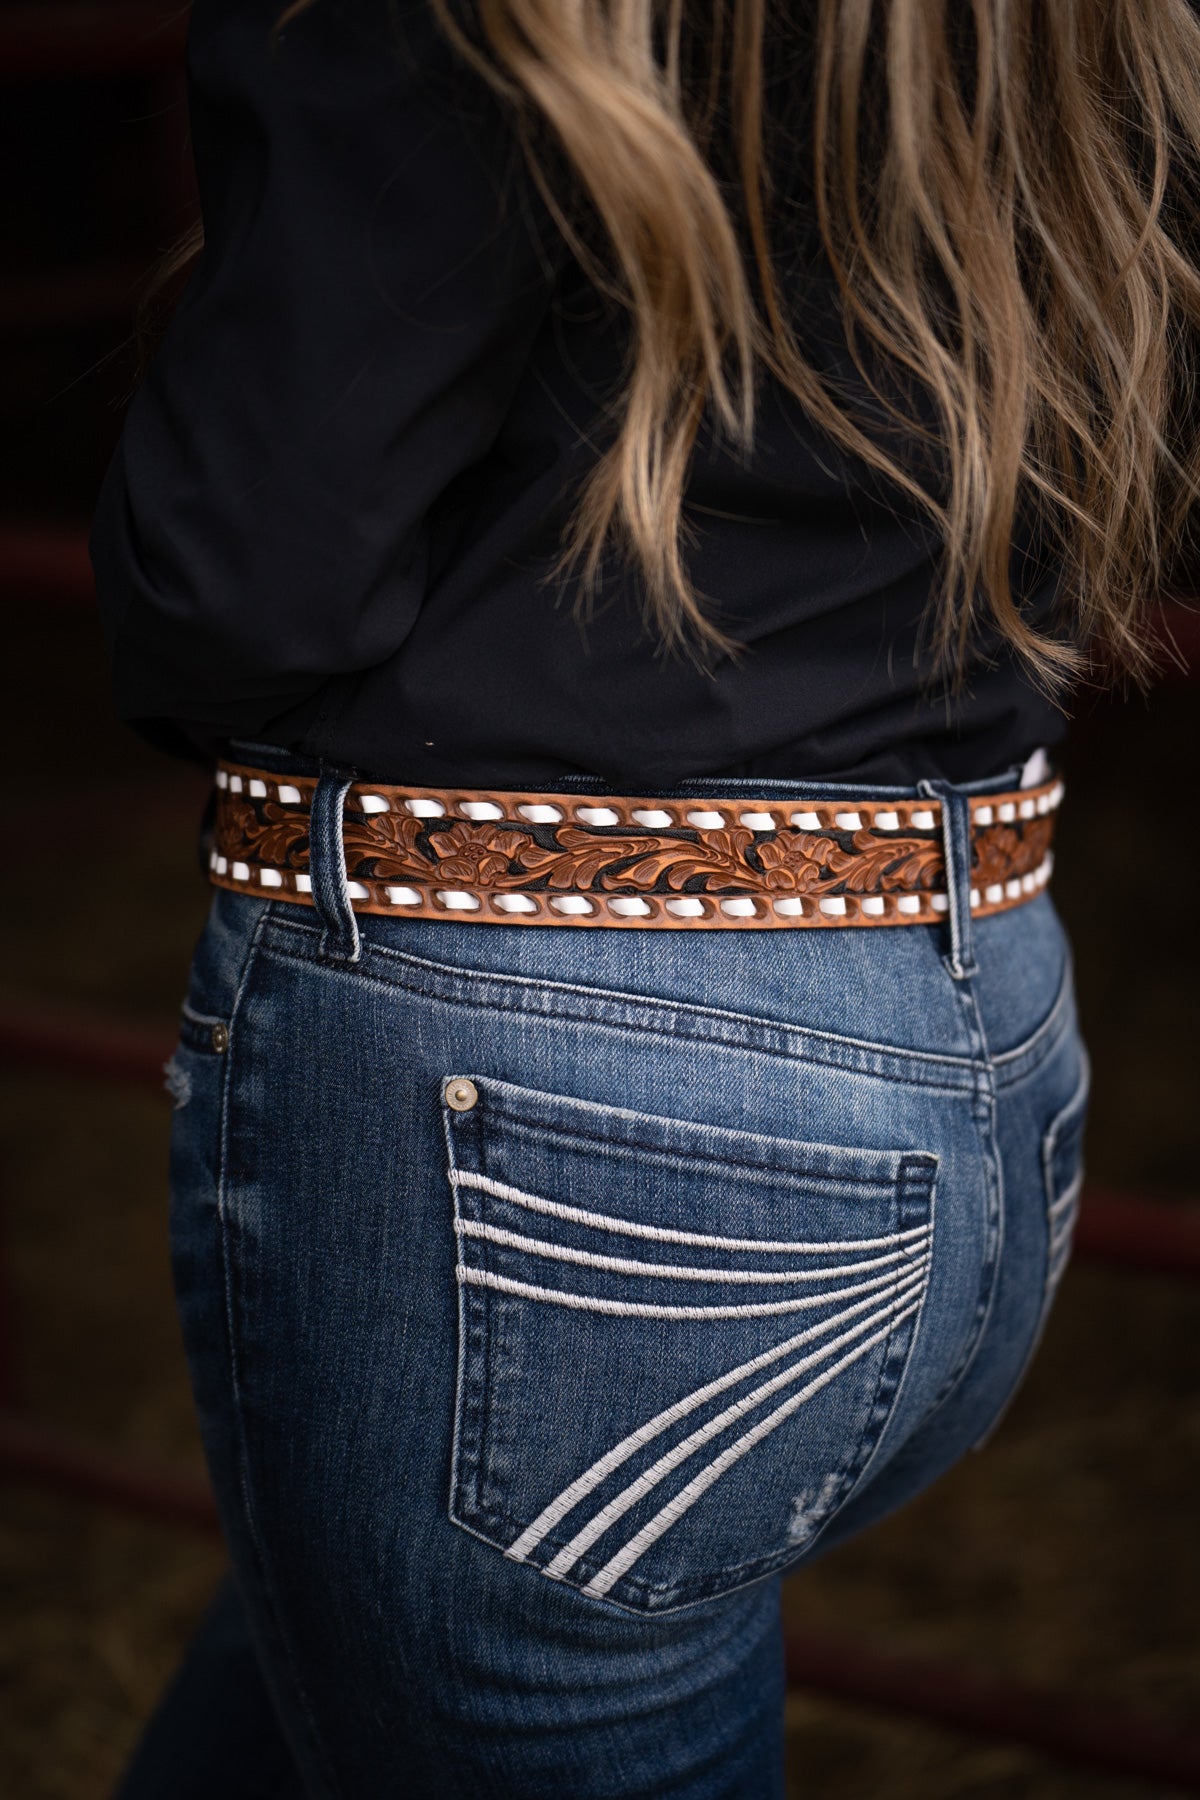 Pecan Vintage with Black Background and White Buck Stitch Belt by Double J Saddlery (1 1/2" width)